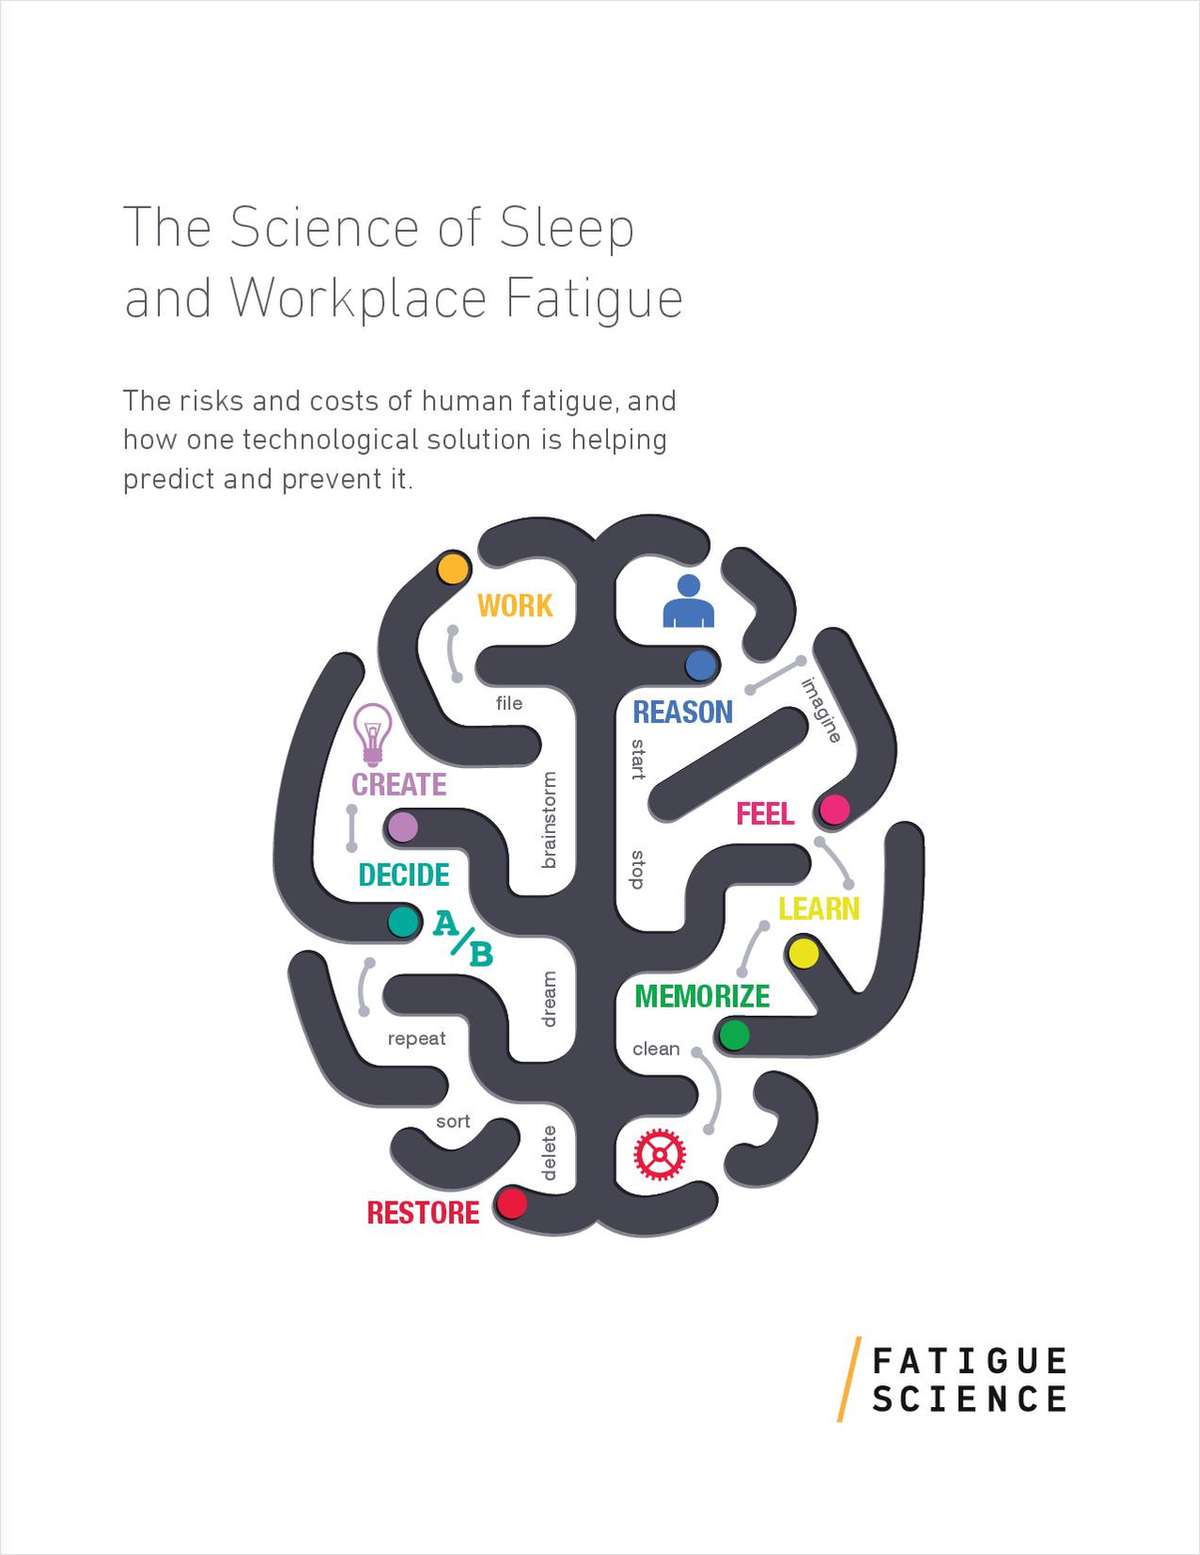 The Science of Sleep and Workplace Fatigue